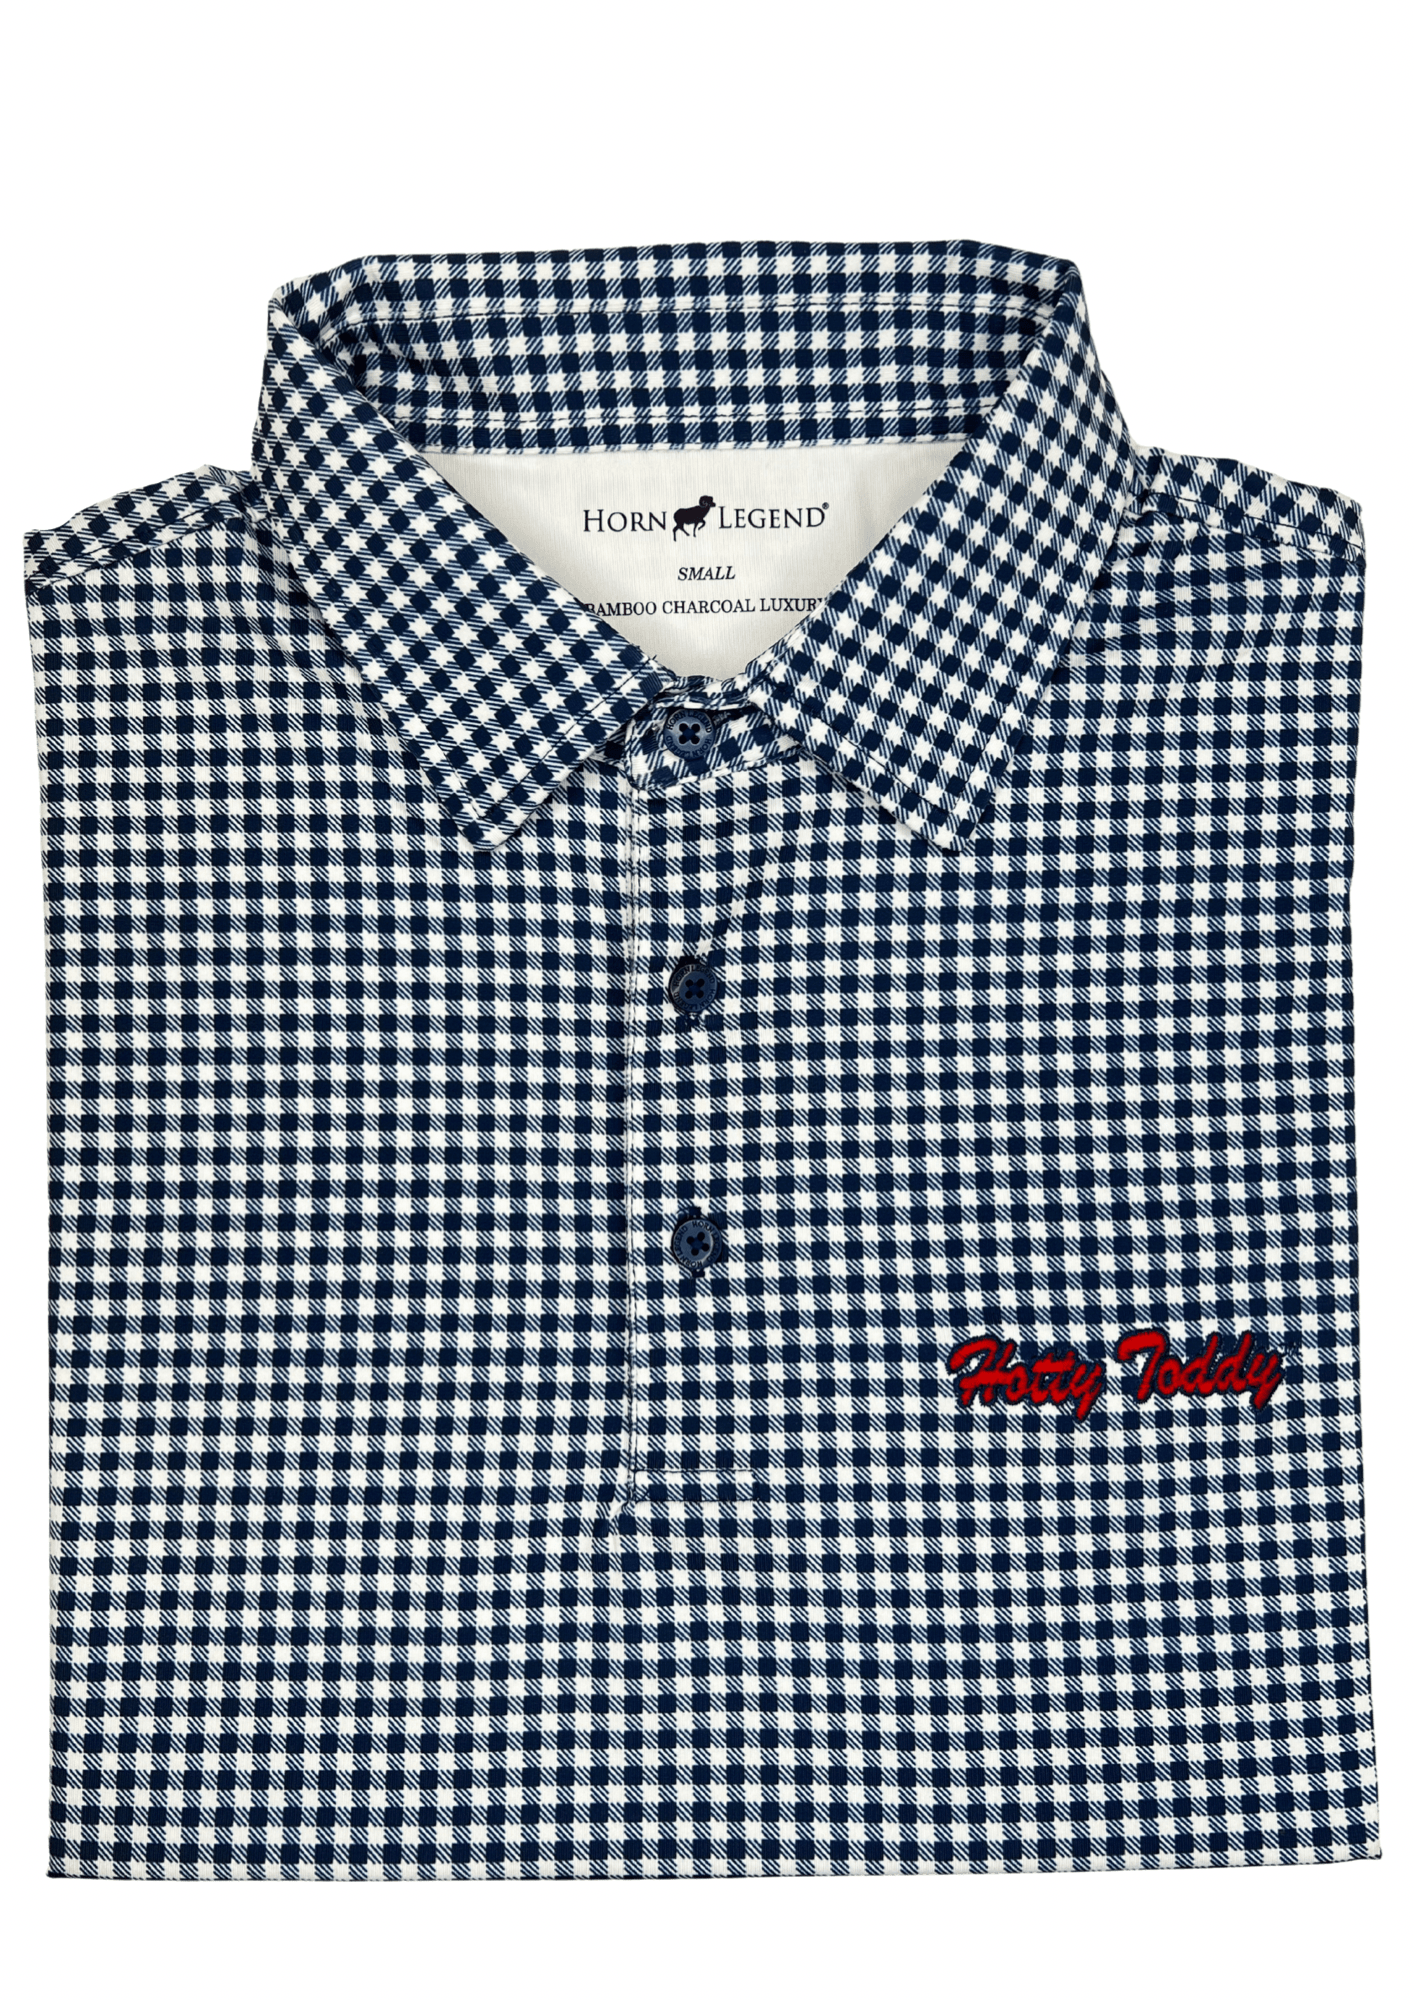 HORN LEGEND NAVY/WHITE / S HOTTY TODDY PLAID POLO